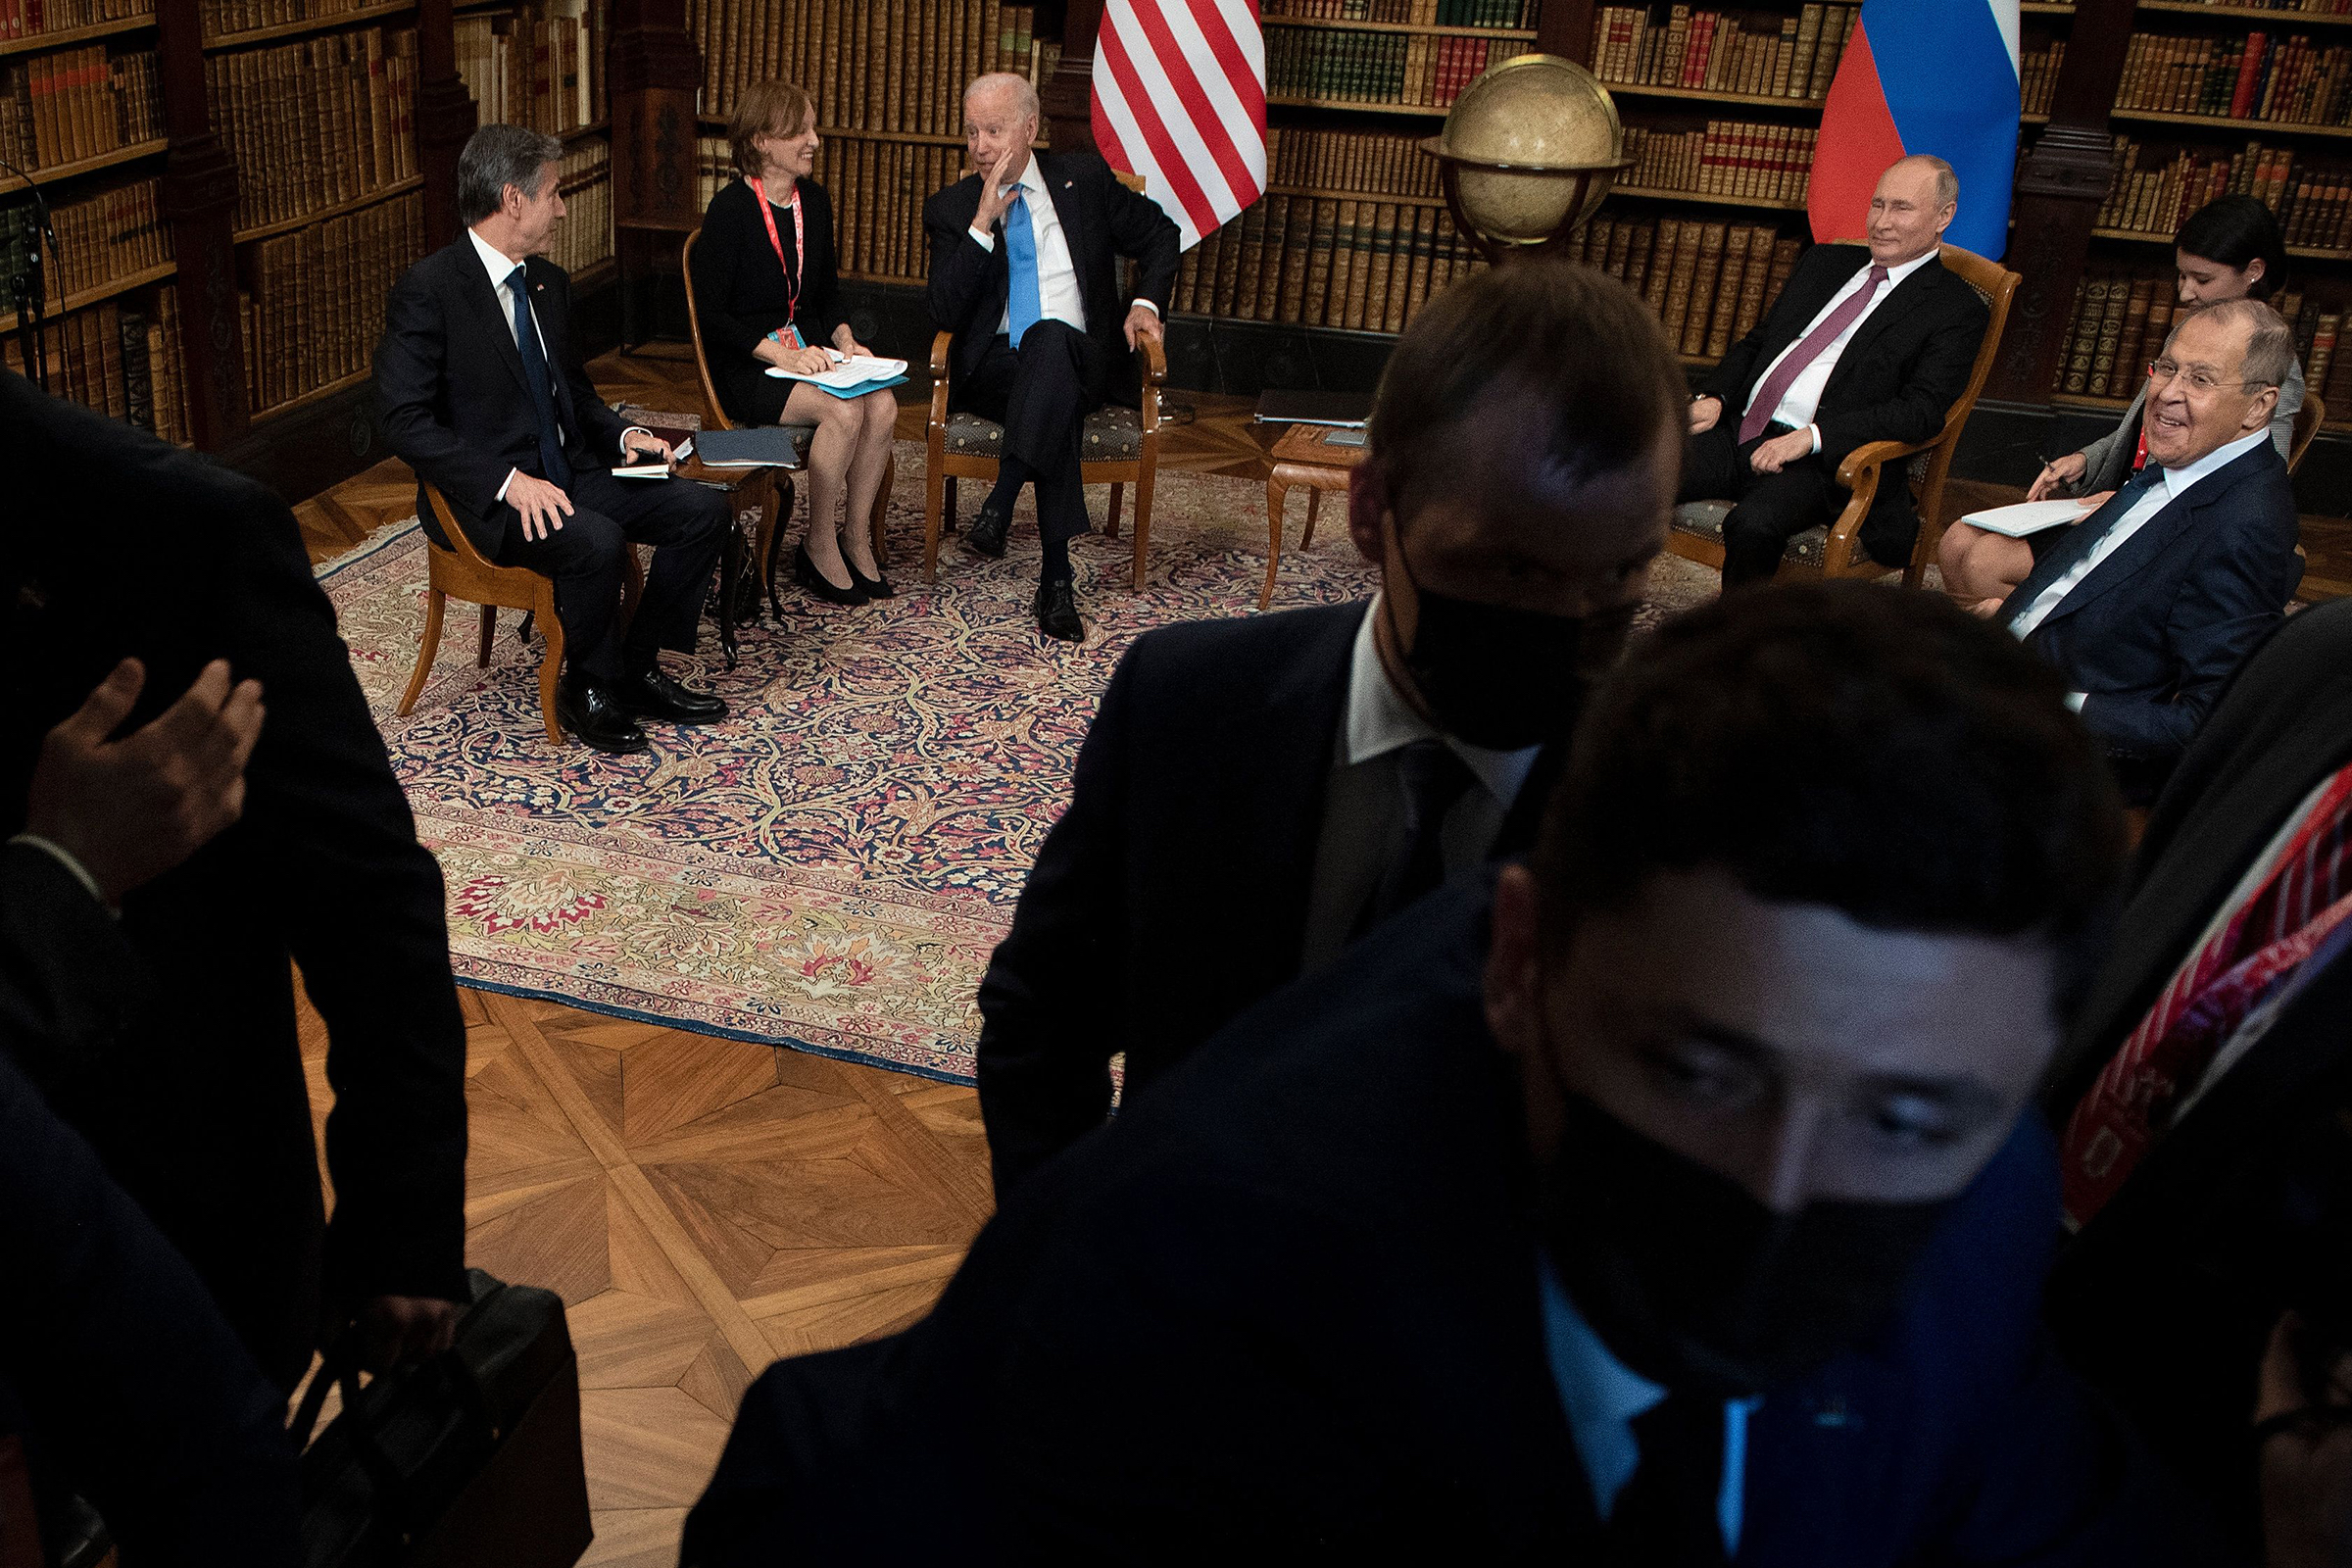 Russian security personnel and others push the press out ahead of a June 16 meeting in Geneva between U.S. President Joe Biden and Russian President Vladimir Putin. Joining the leaders are U.S. Secretary of State Antony Blinken, left, and Russian Foreign Minister Sergey Lavrov, right.